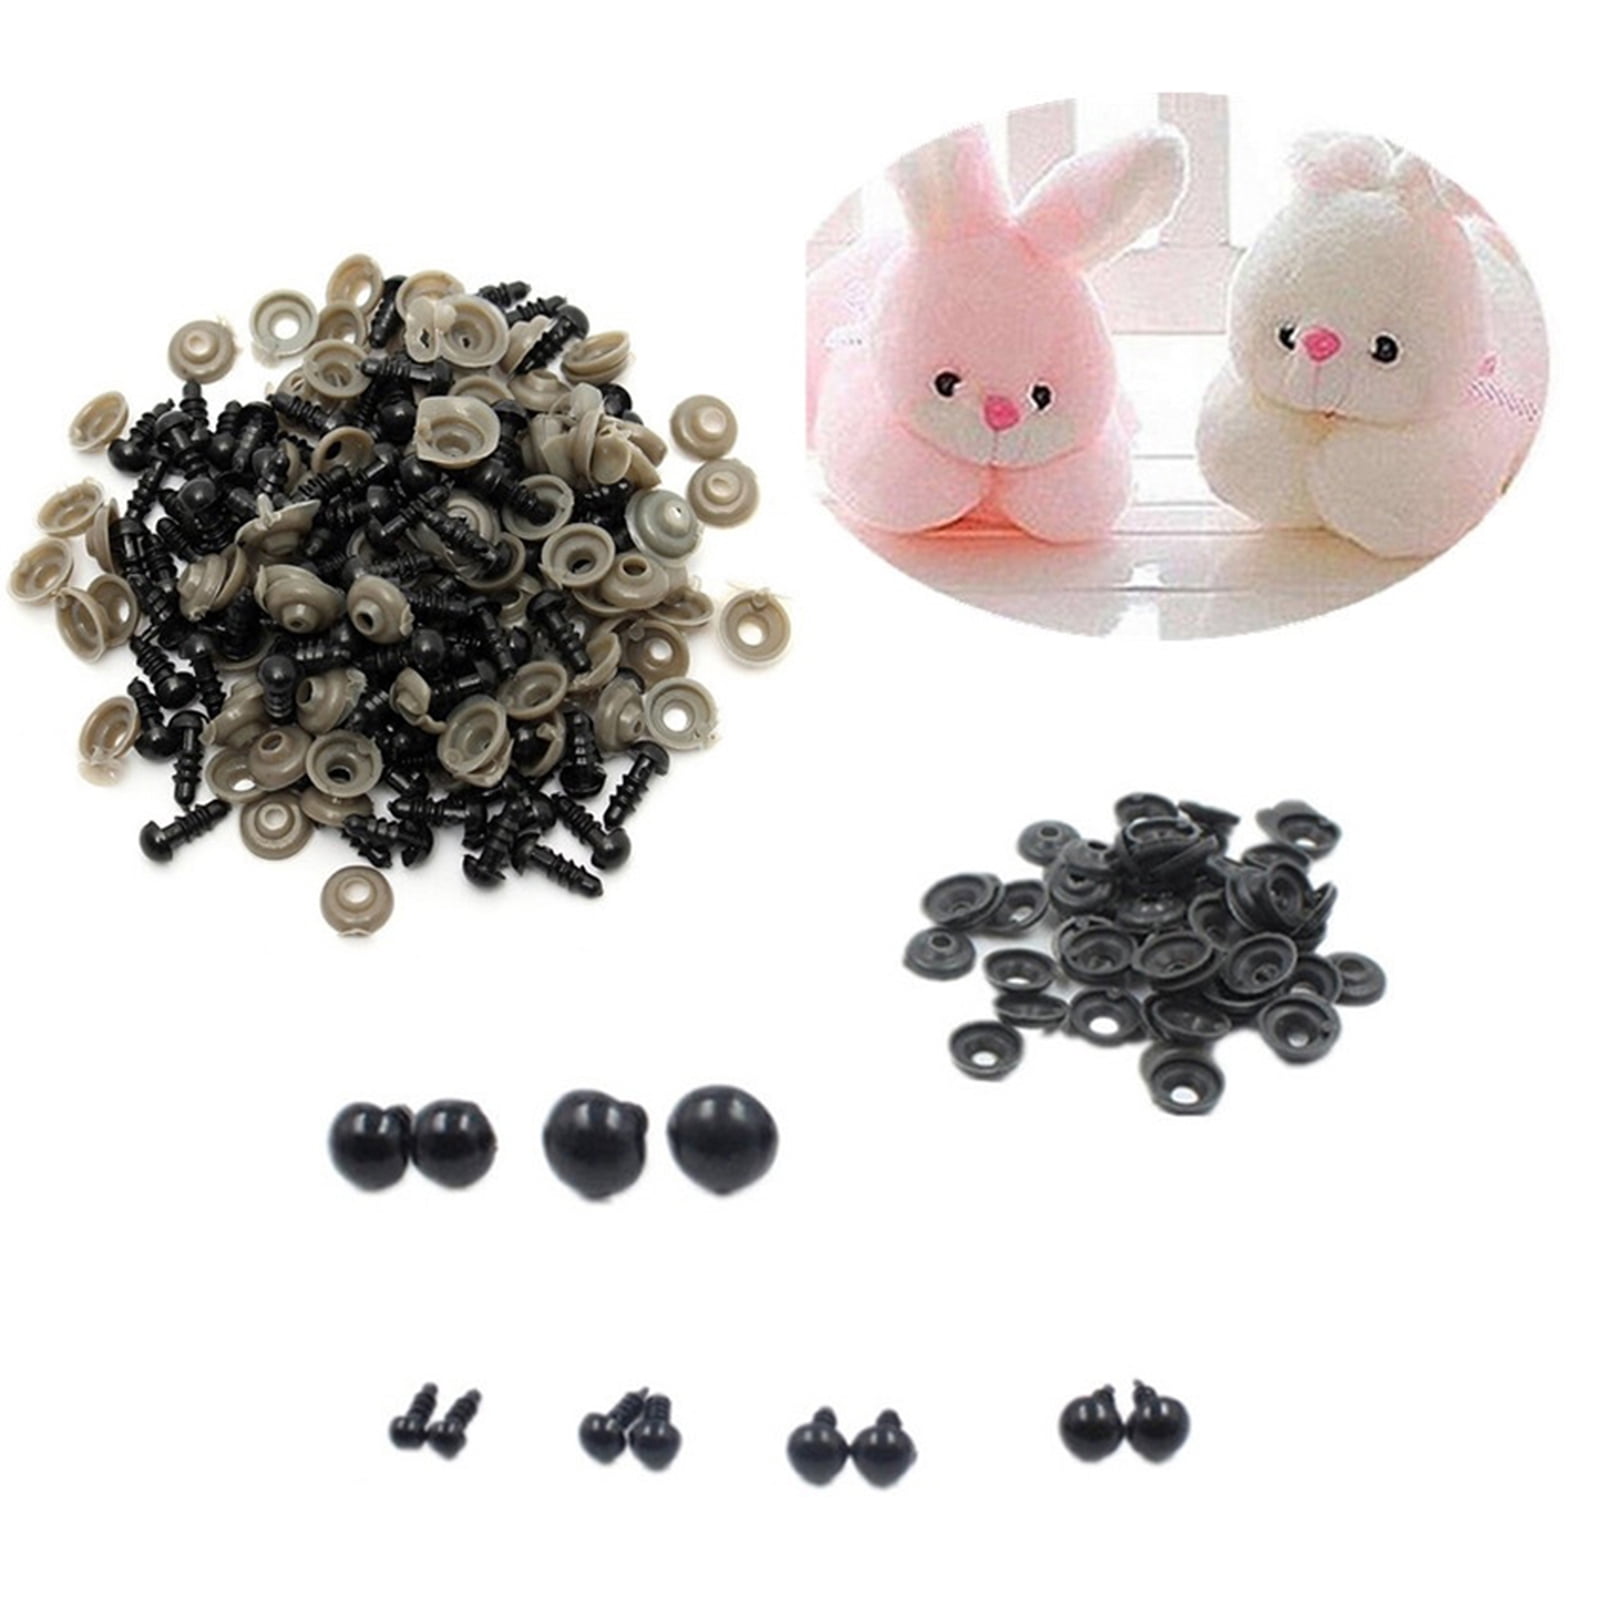 Details about   100Pcs Black Plastic Safety Eyes Toy for Teddy Bear Doll Animal Making Craft DIY 